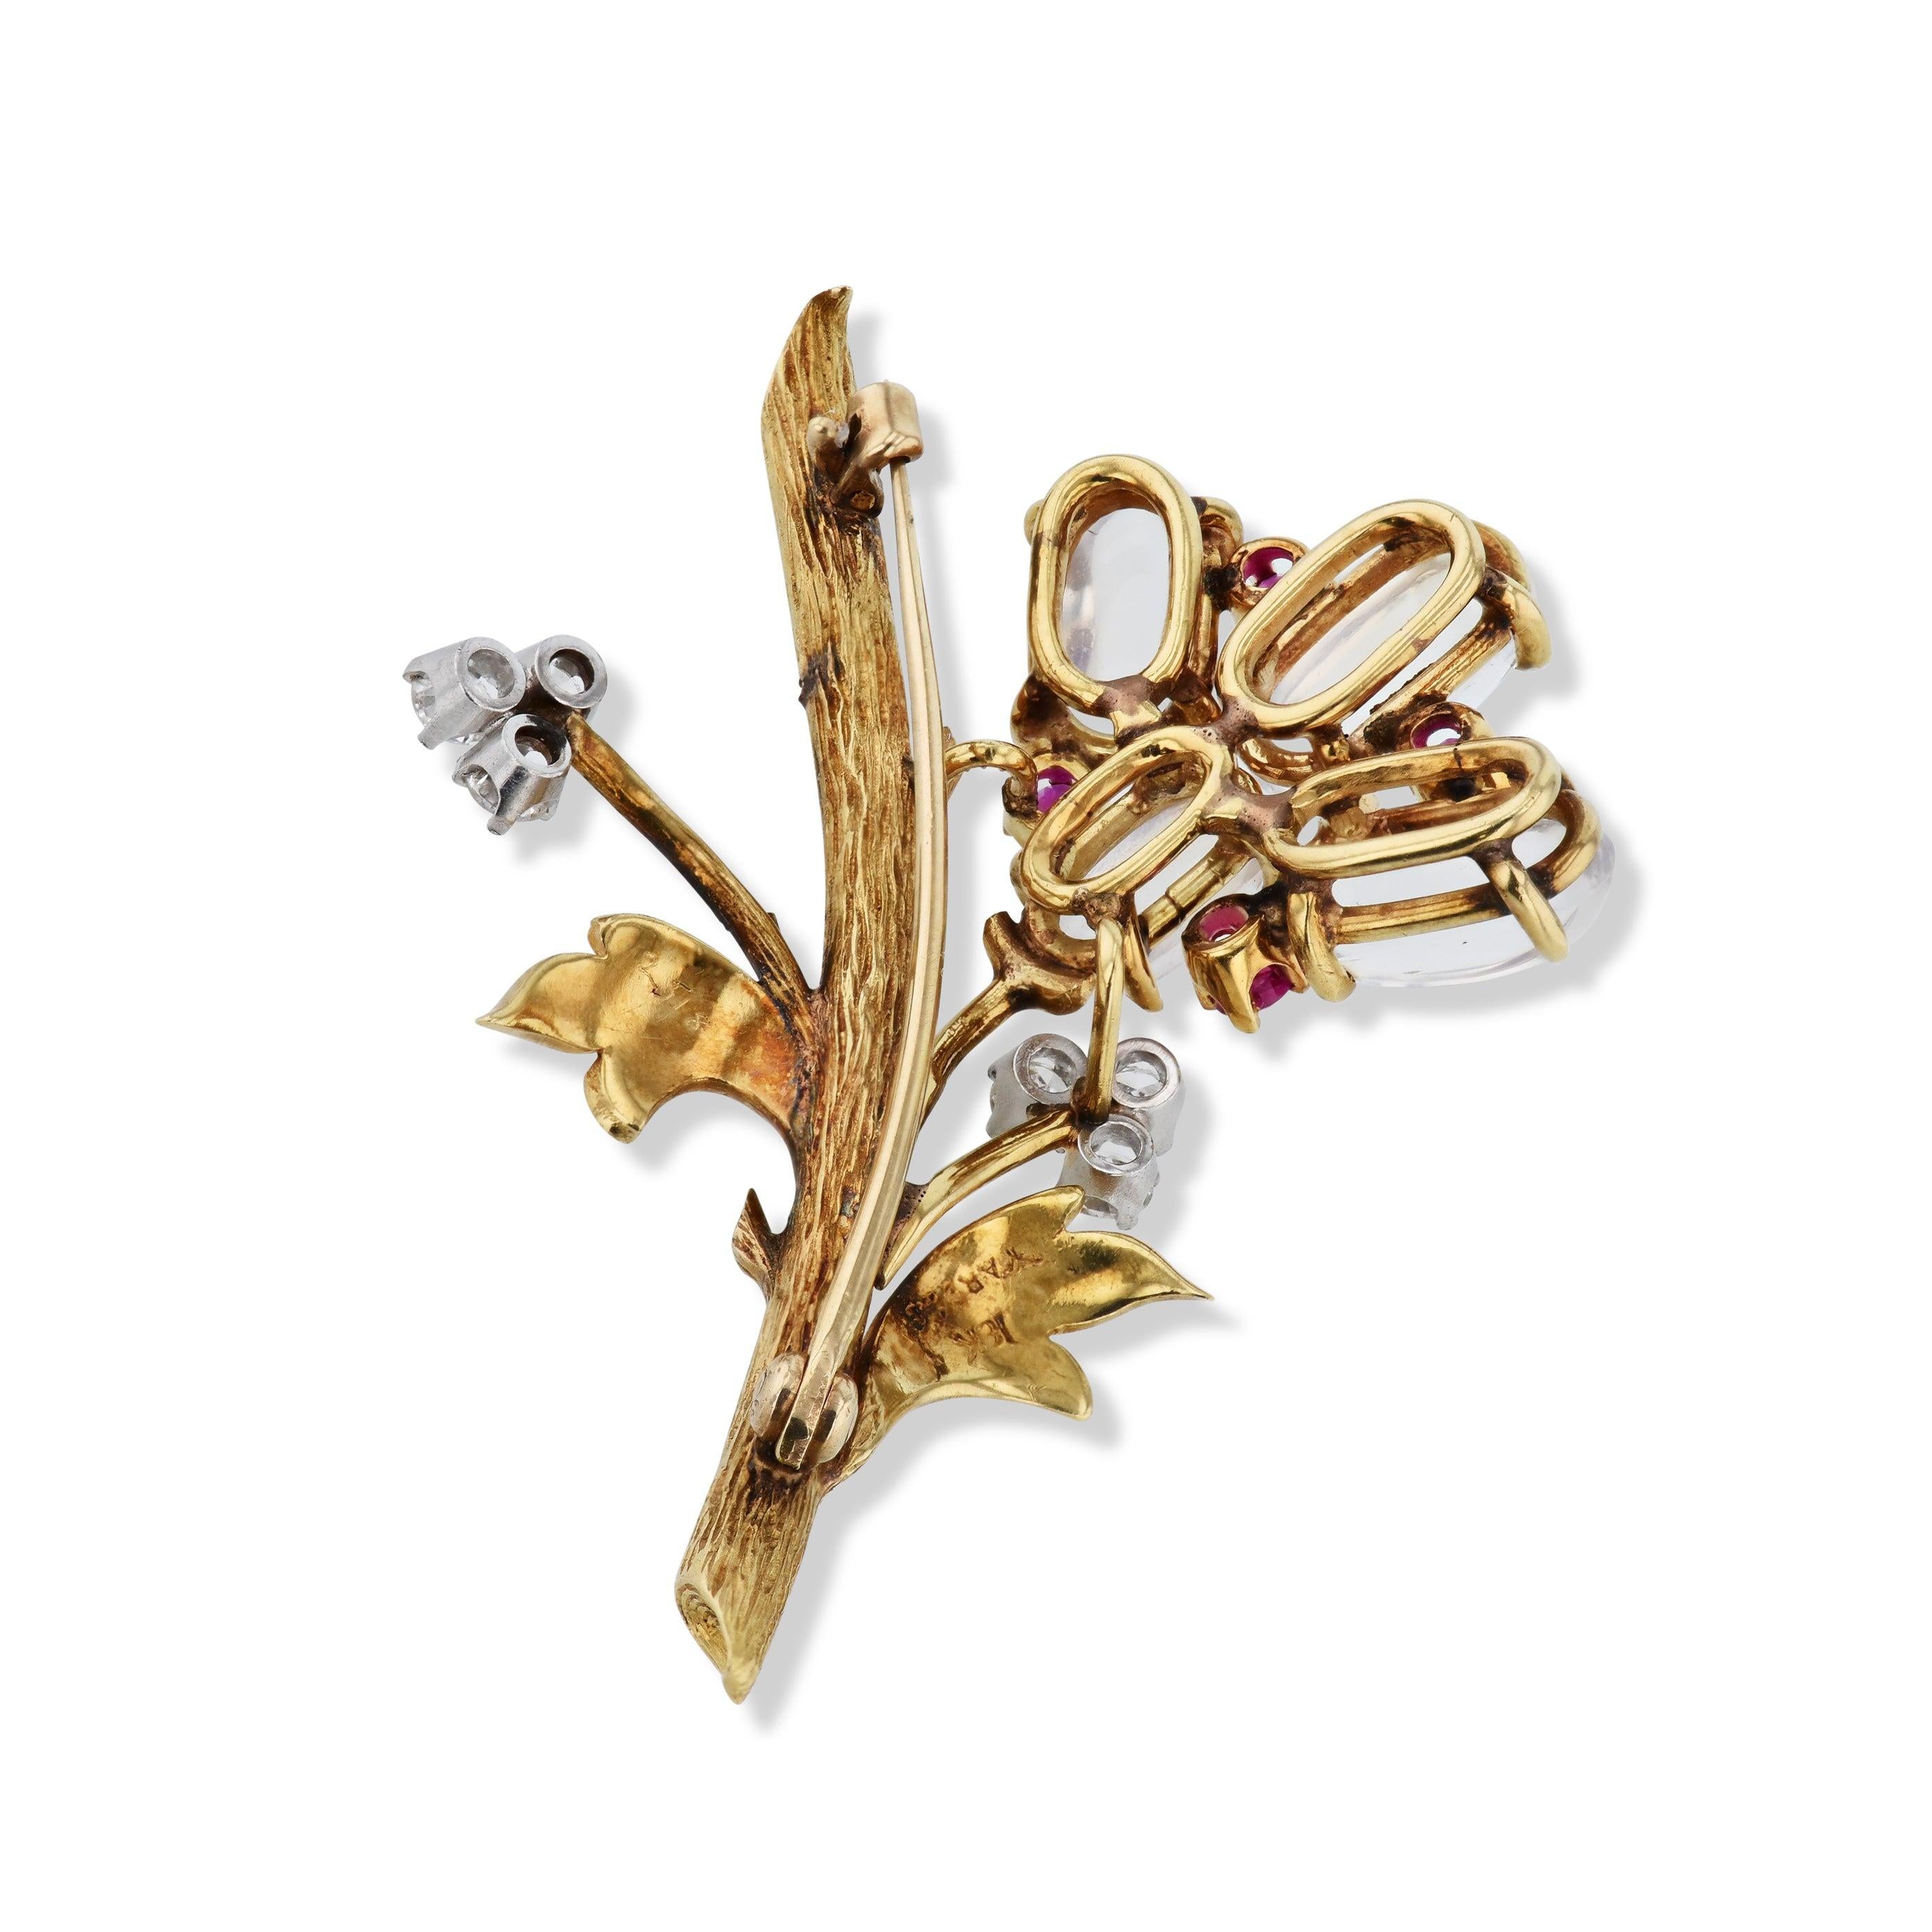 Crafted from 18kt. yellow gold, this exquisite estate brooch showcases six dazzling diamonds, four shimmering moonstones, and four vibrant rubies! A large pin on the back ensures you'll be able to secure it with ease. Signed 